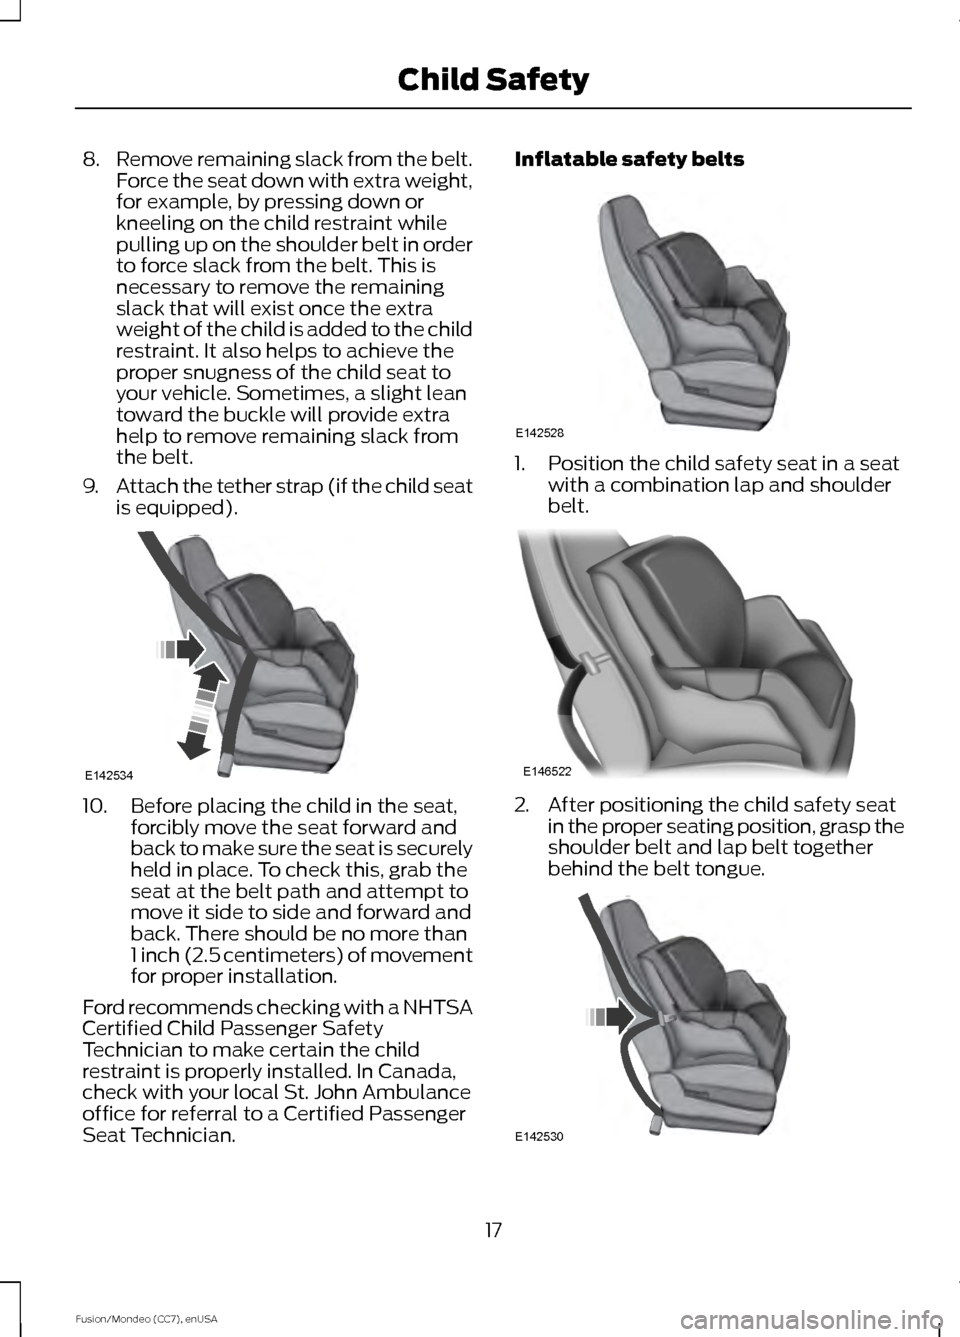 FORD FUSION (AMERICAS) 2015 2.G Owners Manual 8.
Remove remaining slack from the belt.
Force the seat down with extra weight,
for example, by pressing down or
kneeling on the child restraint while
pulling up on the shoulder belt in order
to force